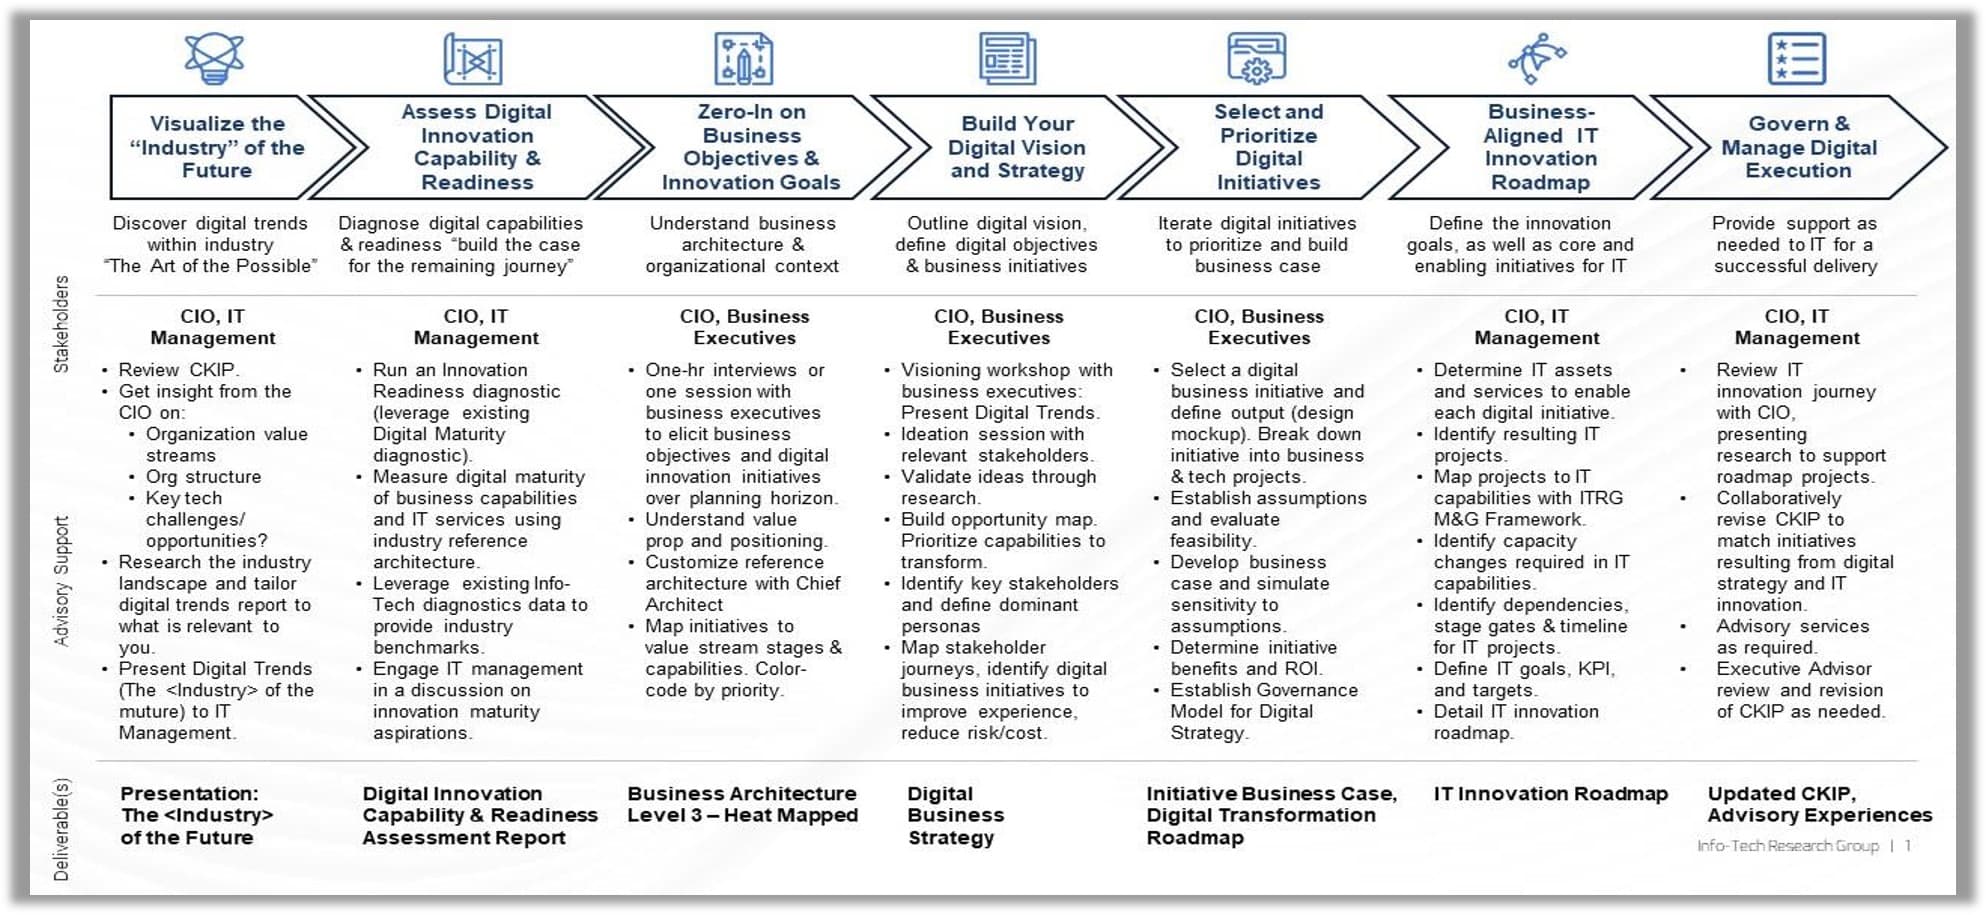 The image contains a screenshot of Info-Tech's Digital Transformation Journey.